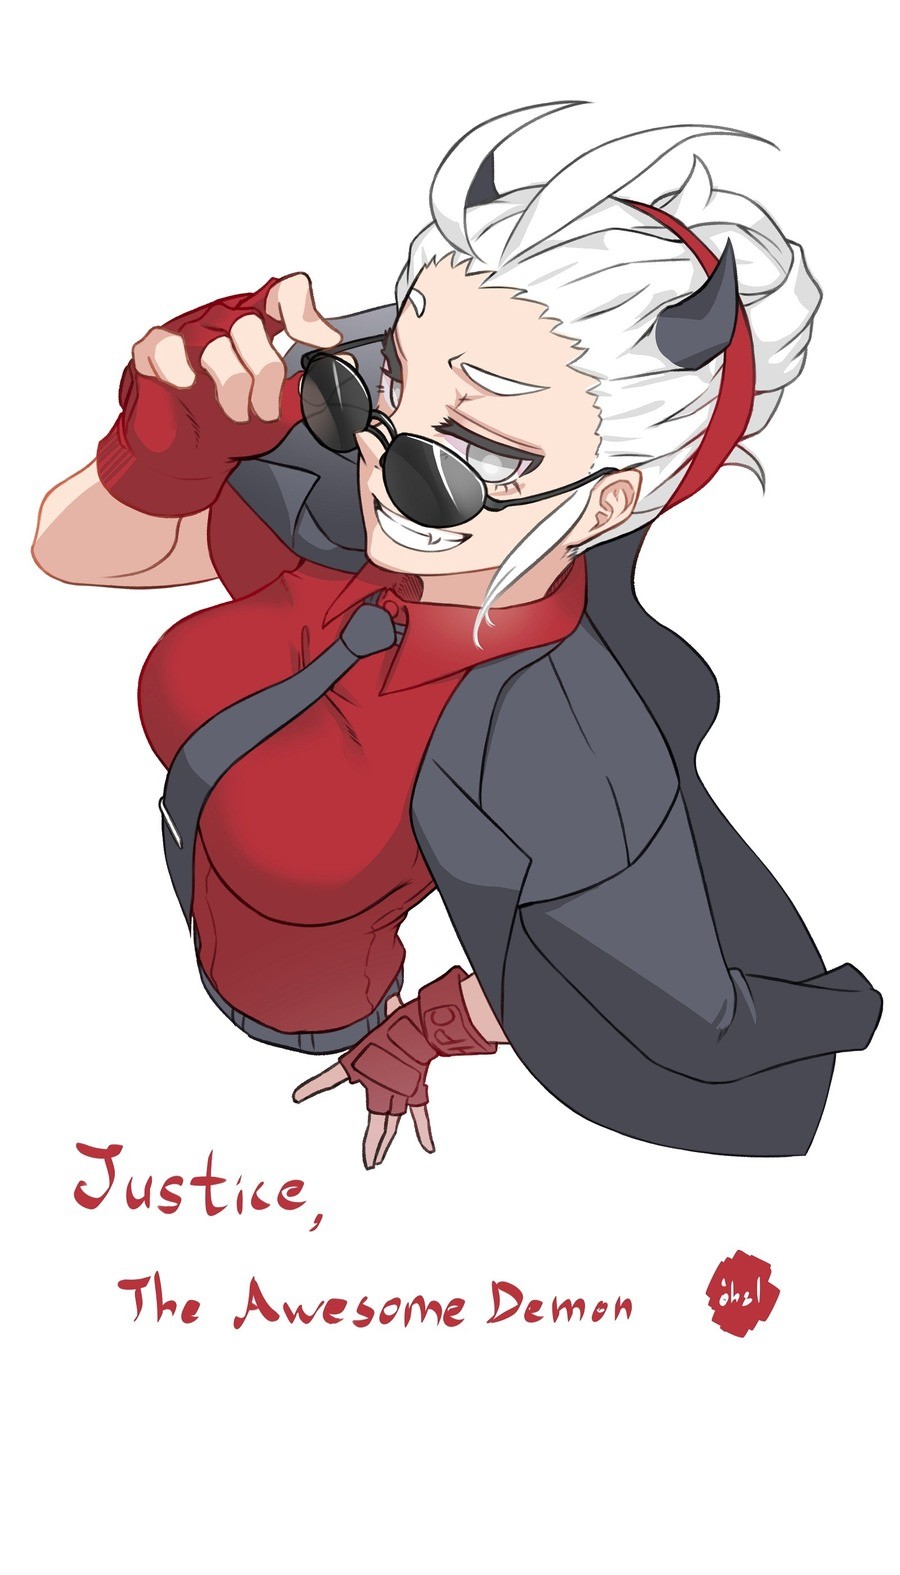 Daily Demon Harem 46: Justice!. Keep it awesome! Source: join list: DailyDemonHarem (194 subs)Mention Clicks: 38148Msgs Sent: 50296Mention History.. Hell yeah